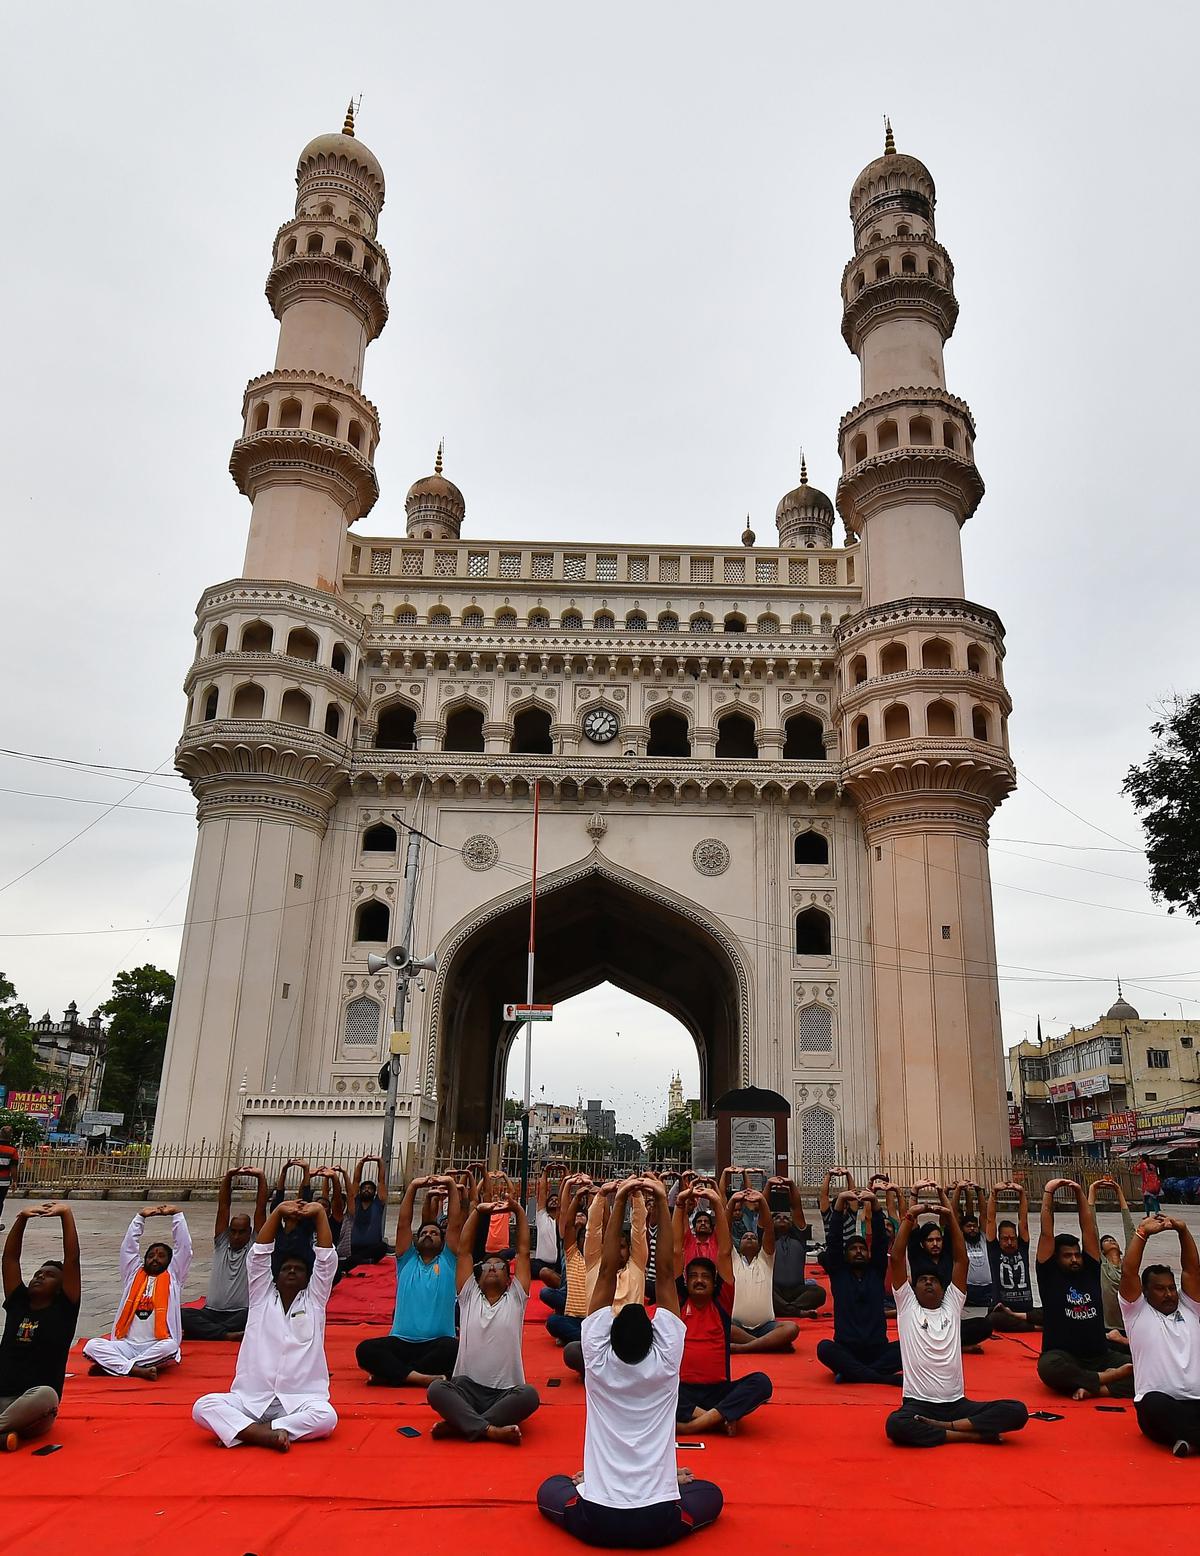 Participants performing yoga at Charminar in the old city of Hyderabad.